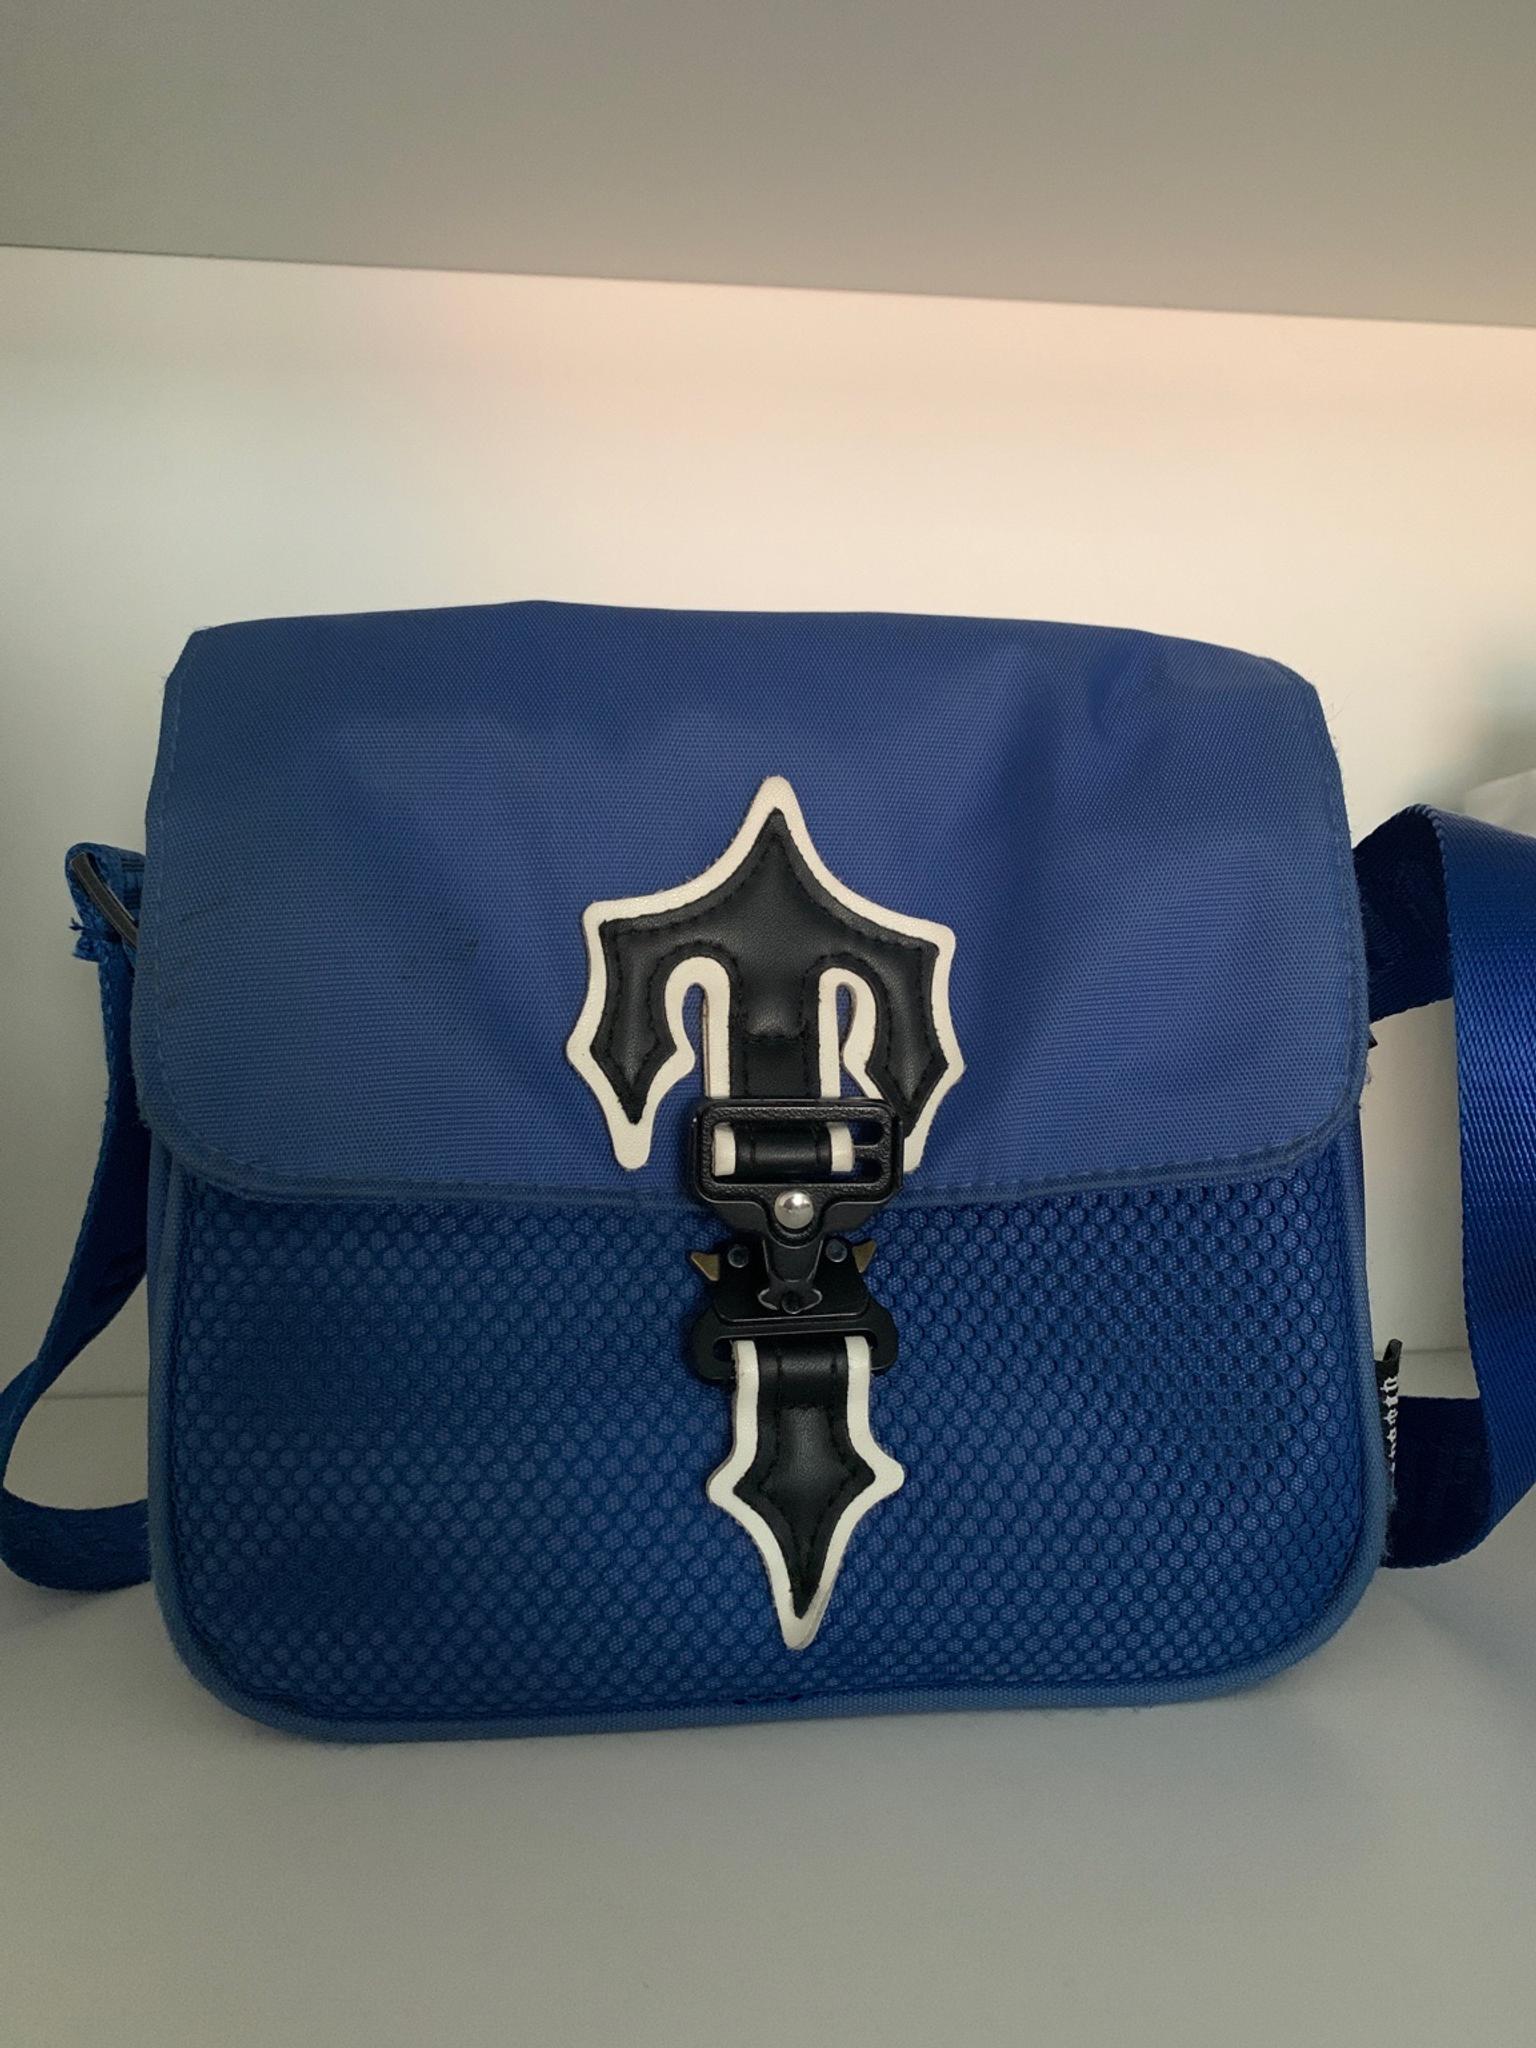 Trapstar bag in LE5 Leicester for £40.00 for sale | Shpock